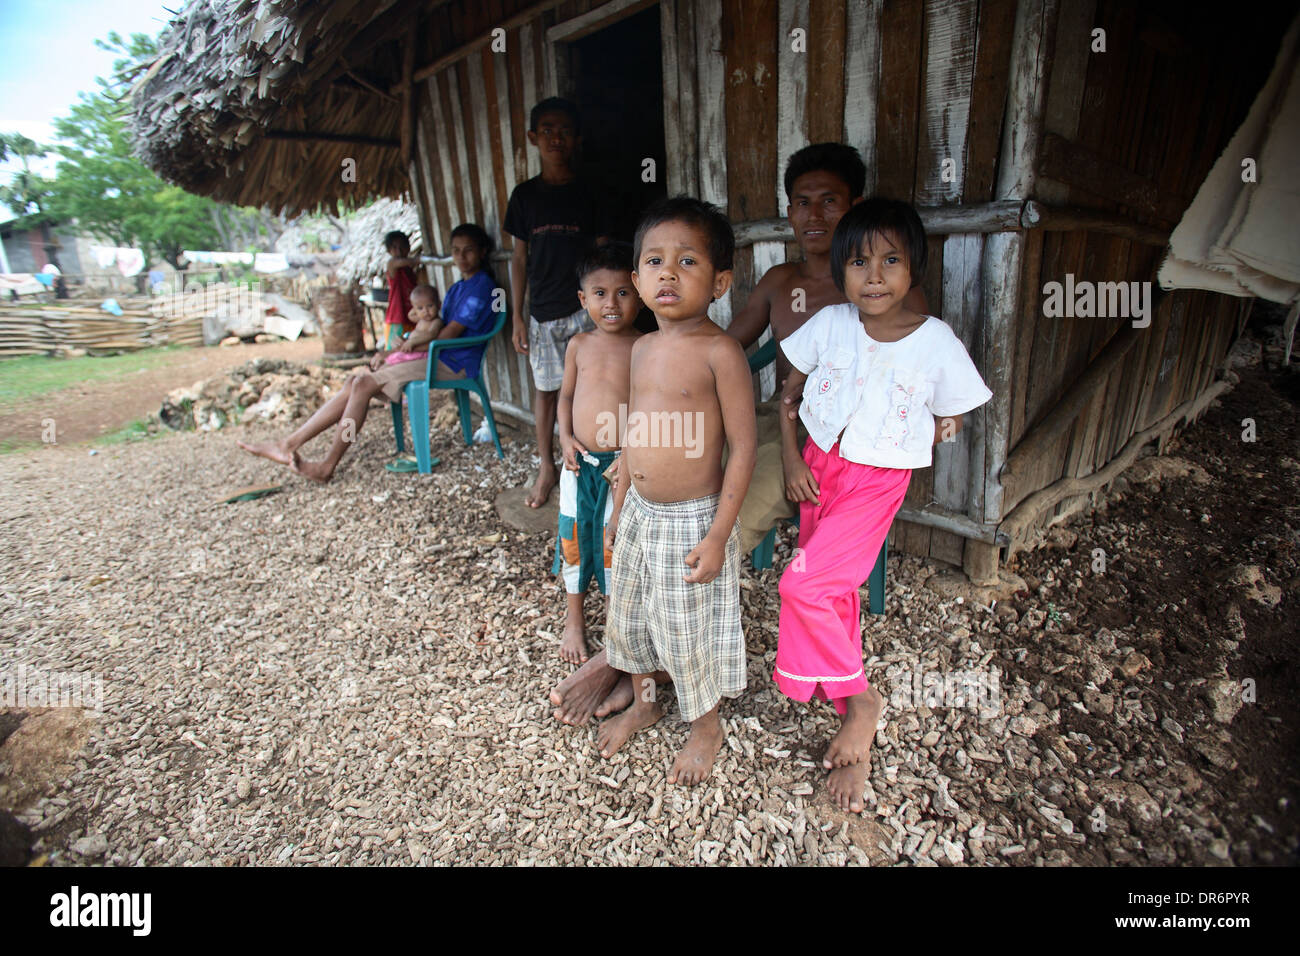 Wide view portrait of Indonesian children from a family living in poverty.  Kupang, West Timor, Indonesia. Nov 2005 Stock Photo